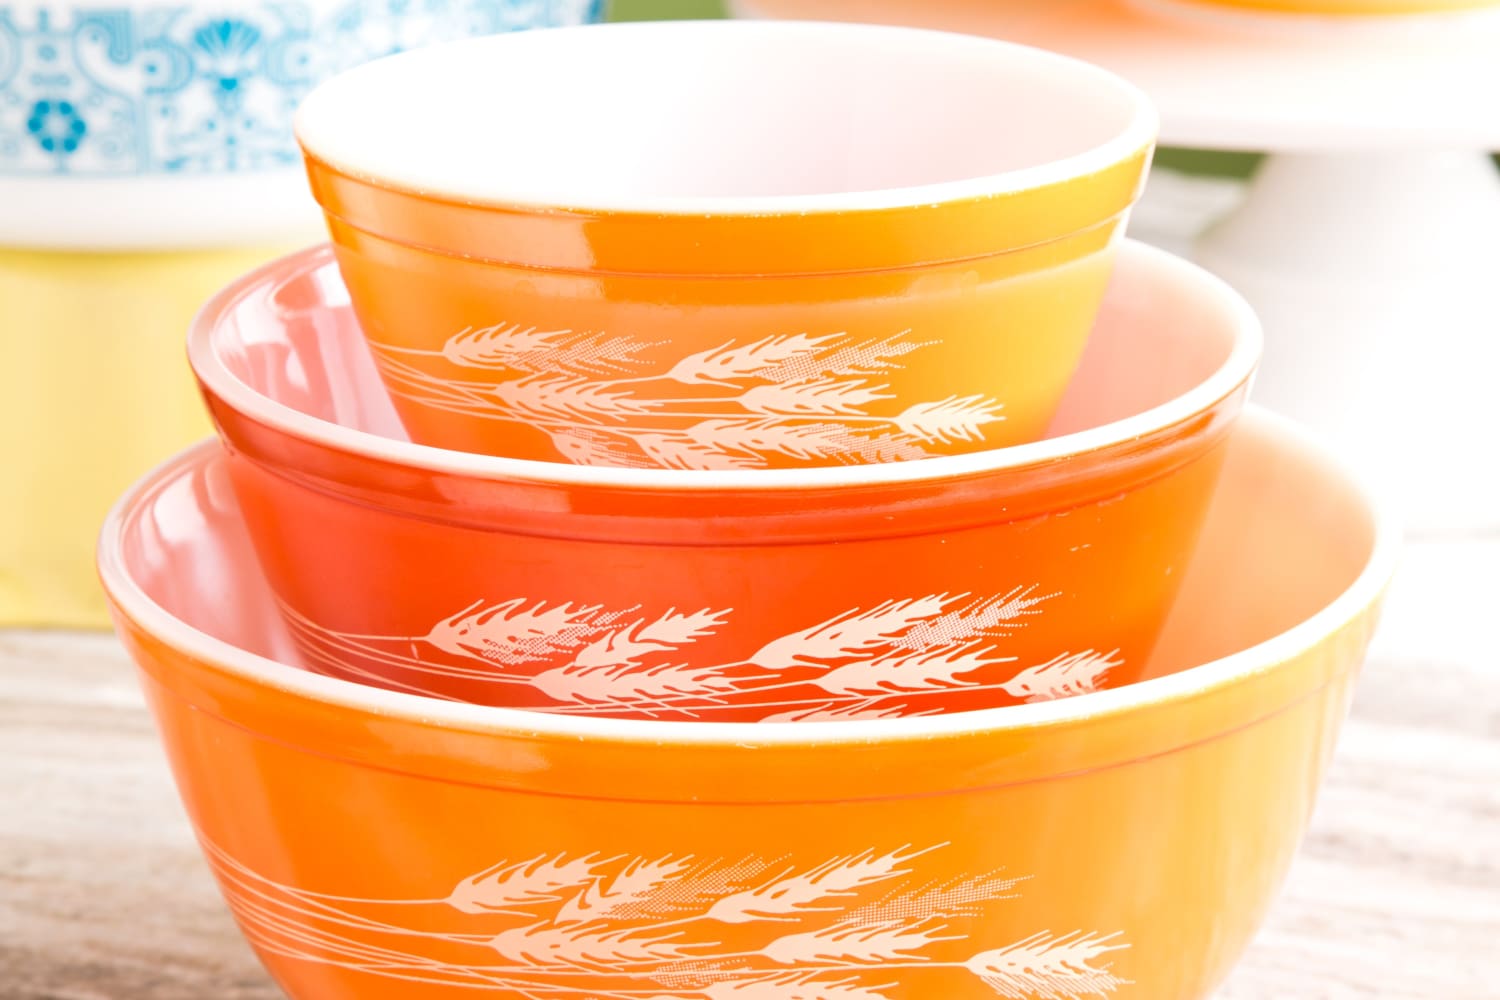 How to Collect Vintage Pyrex — Expert Tips for Collecting Vintage